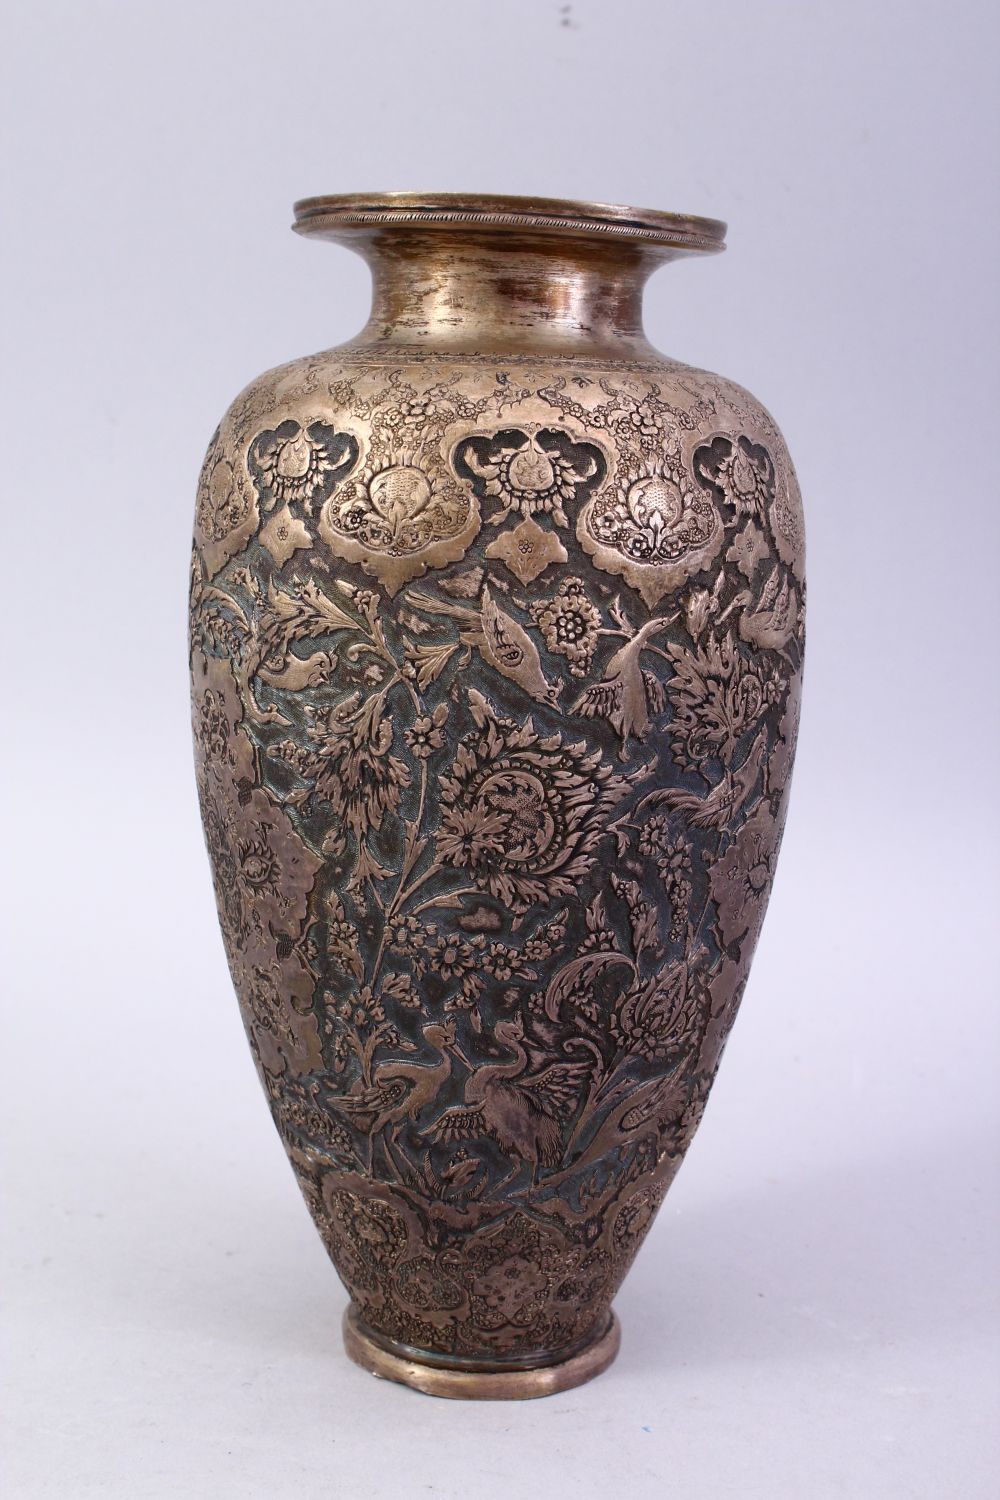 A 18TH / 19TH CENTURY IRANIAN CARVED SILVER VASE, with a multitude of decoration depicting flora and - Image 4 of 12